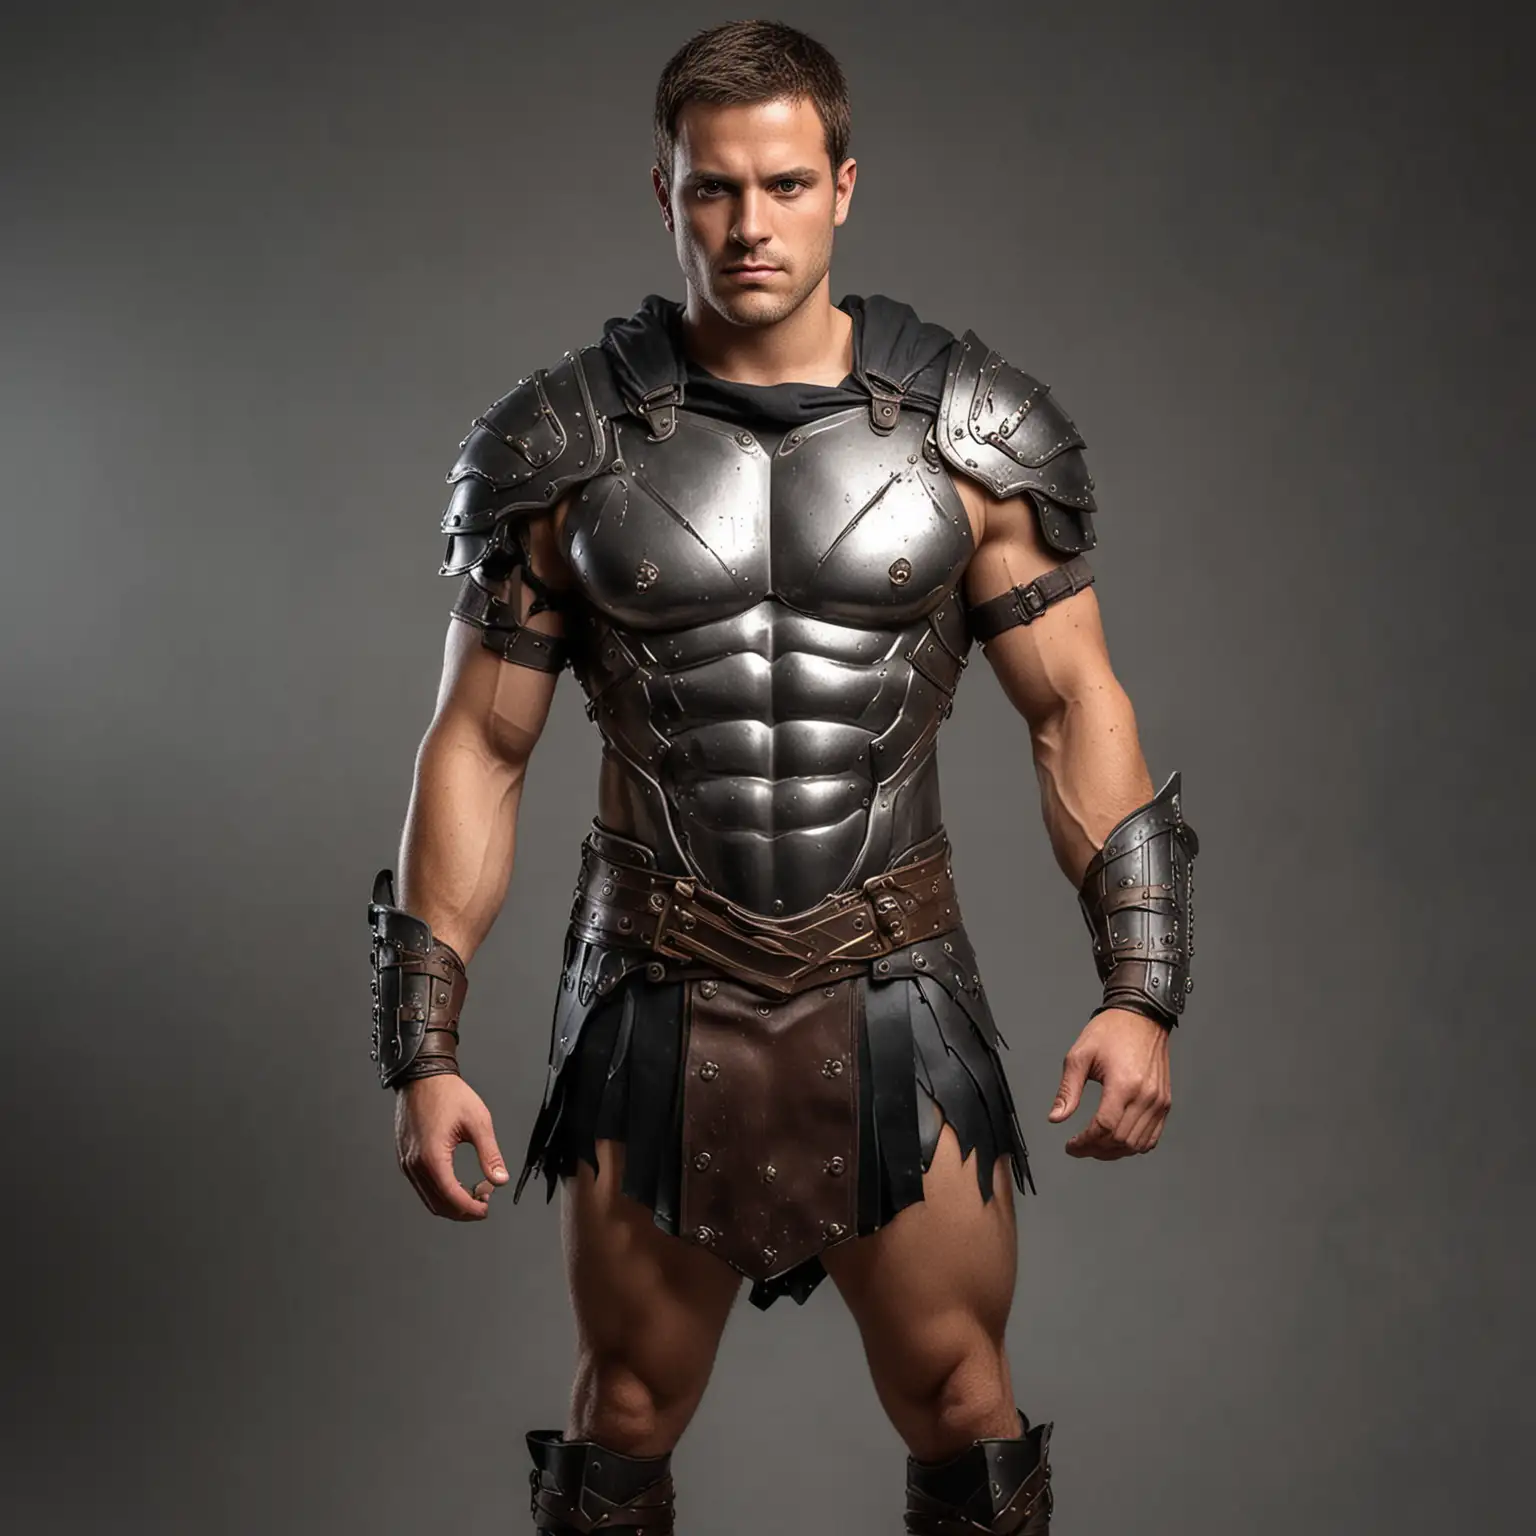 background removed, steel body armor covering his torso, muscular male Spartan warrior, sandals, bare legs, naked thighs, very short leather kilt, steel body armor covers chest area, cloak, cleanshaven, gold eyes